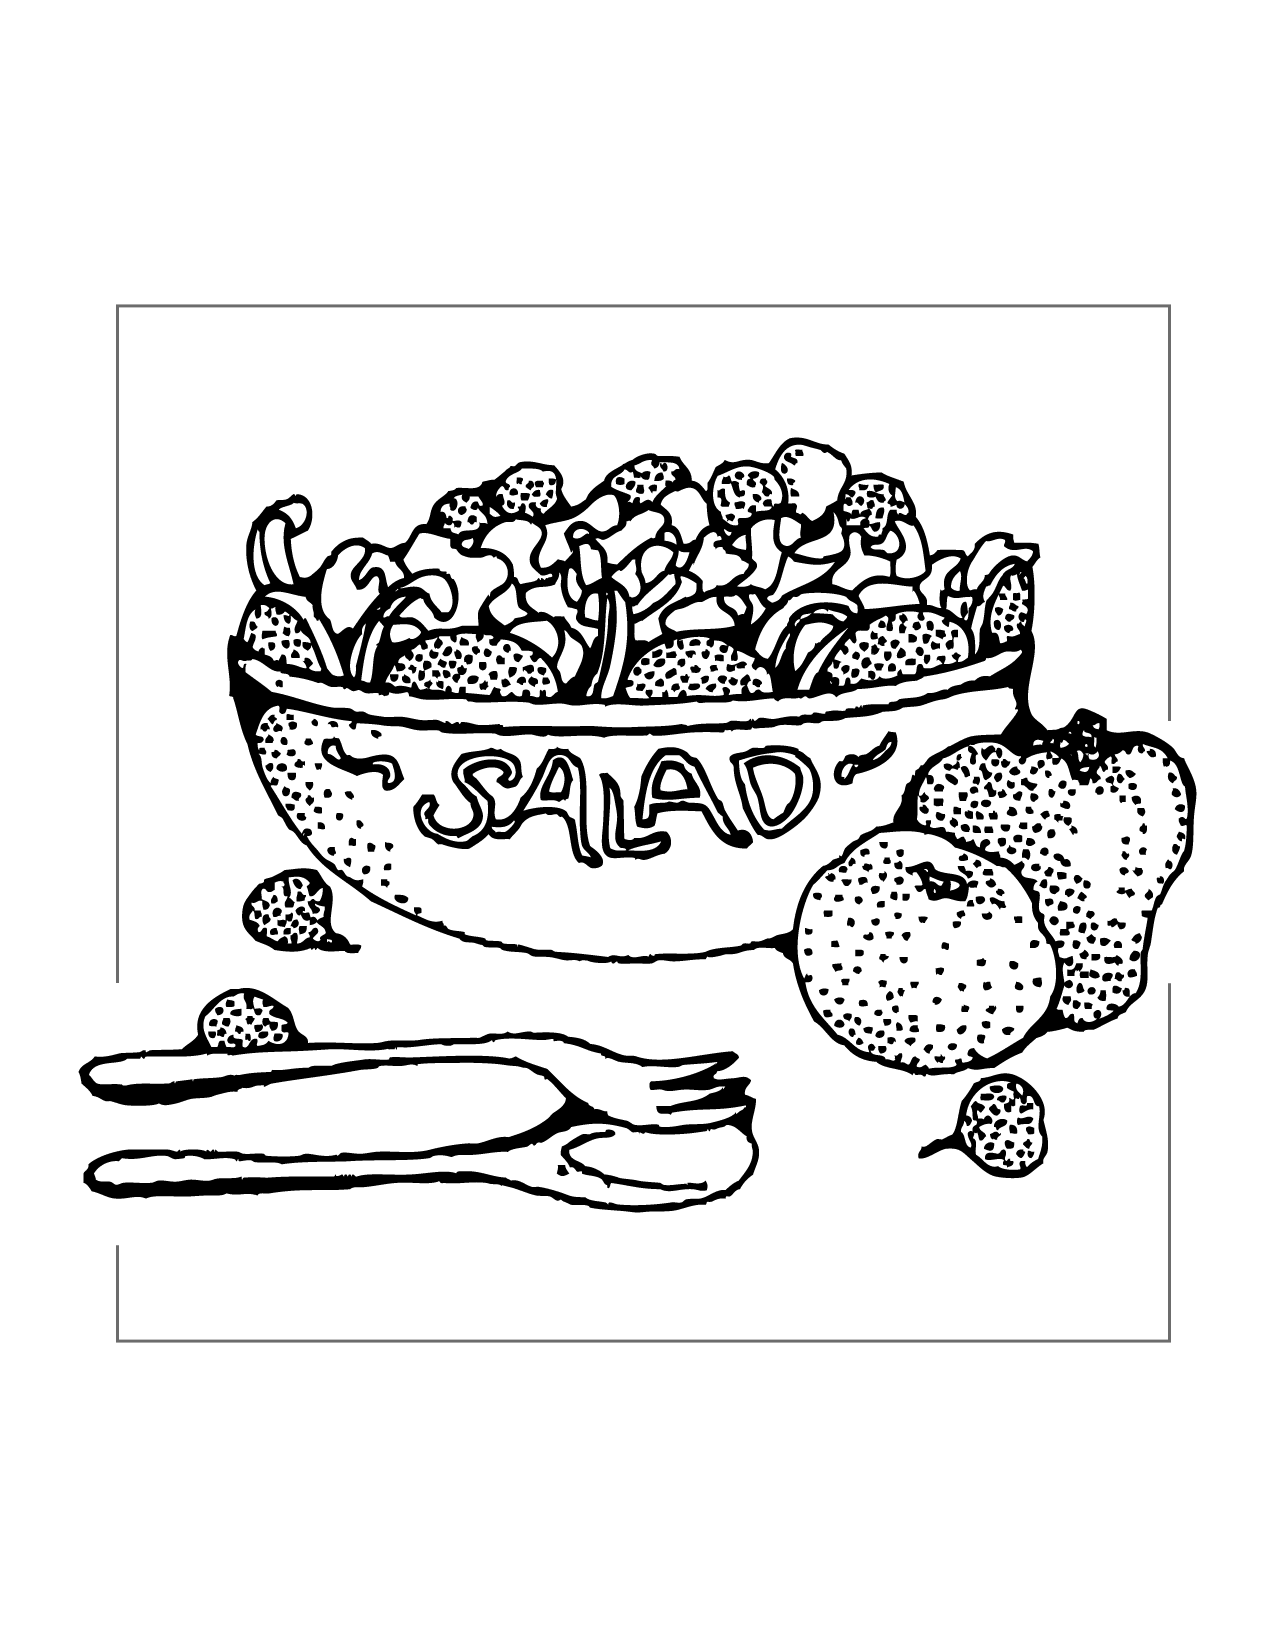 Vegetable Salad Coloring Page